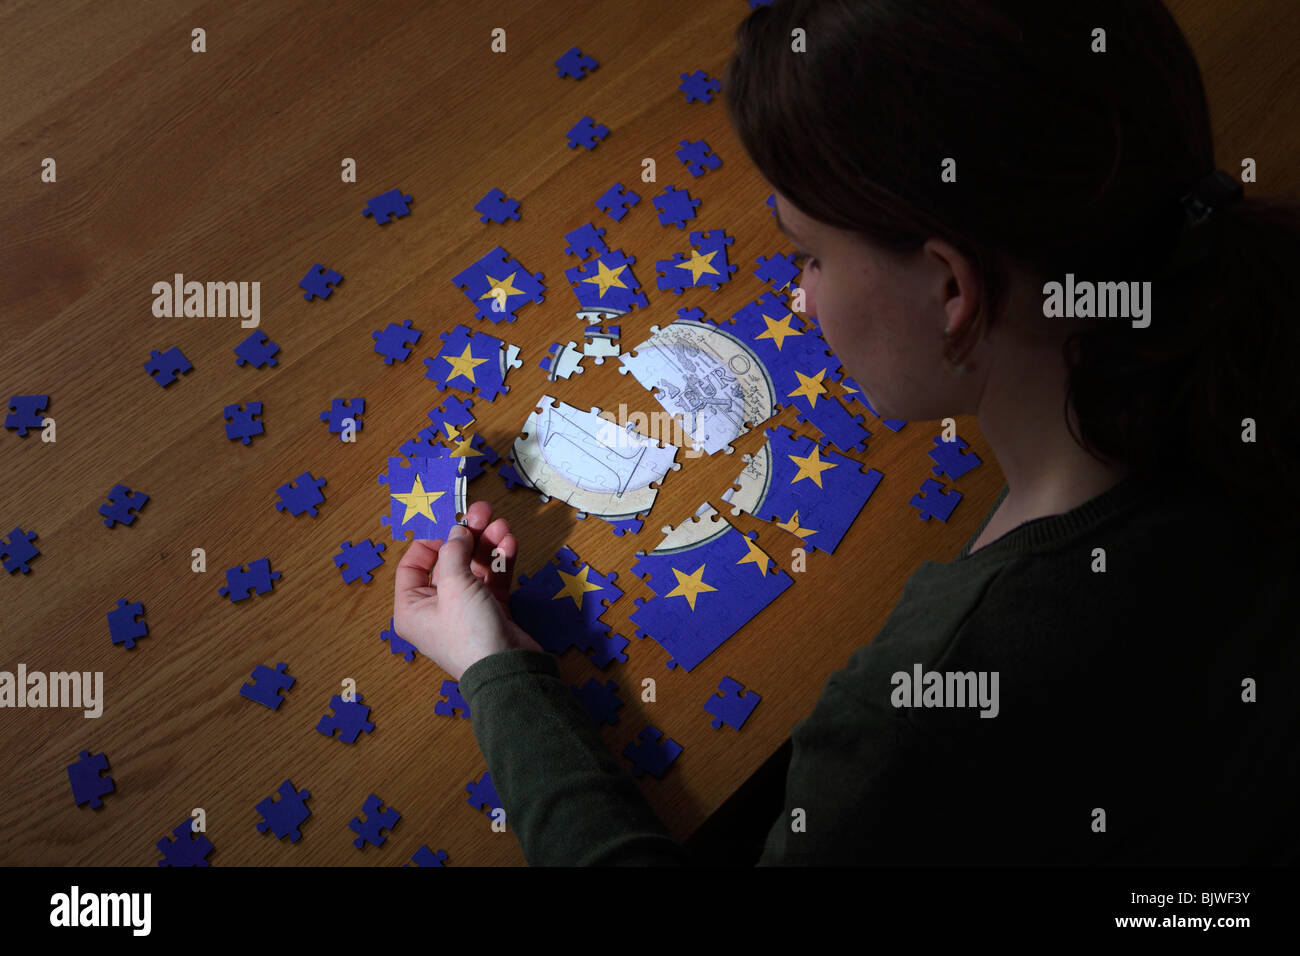 Puzzle with the emblem of the European Union and with Euro coin in the centre Stock Photo